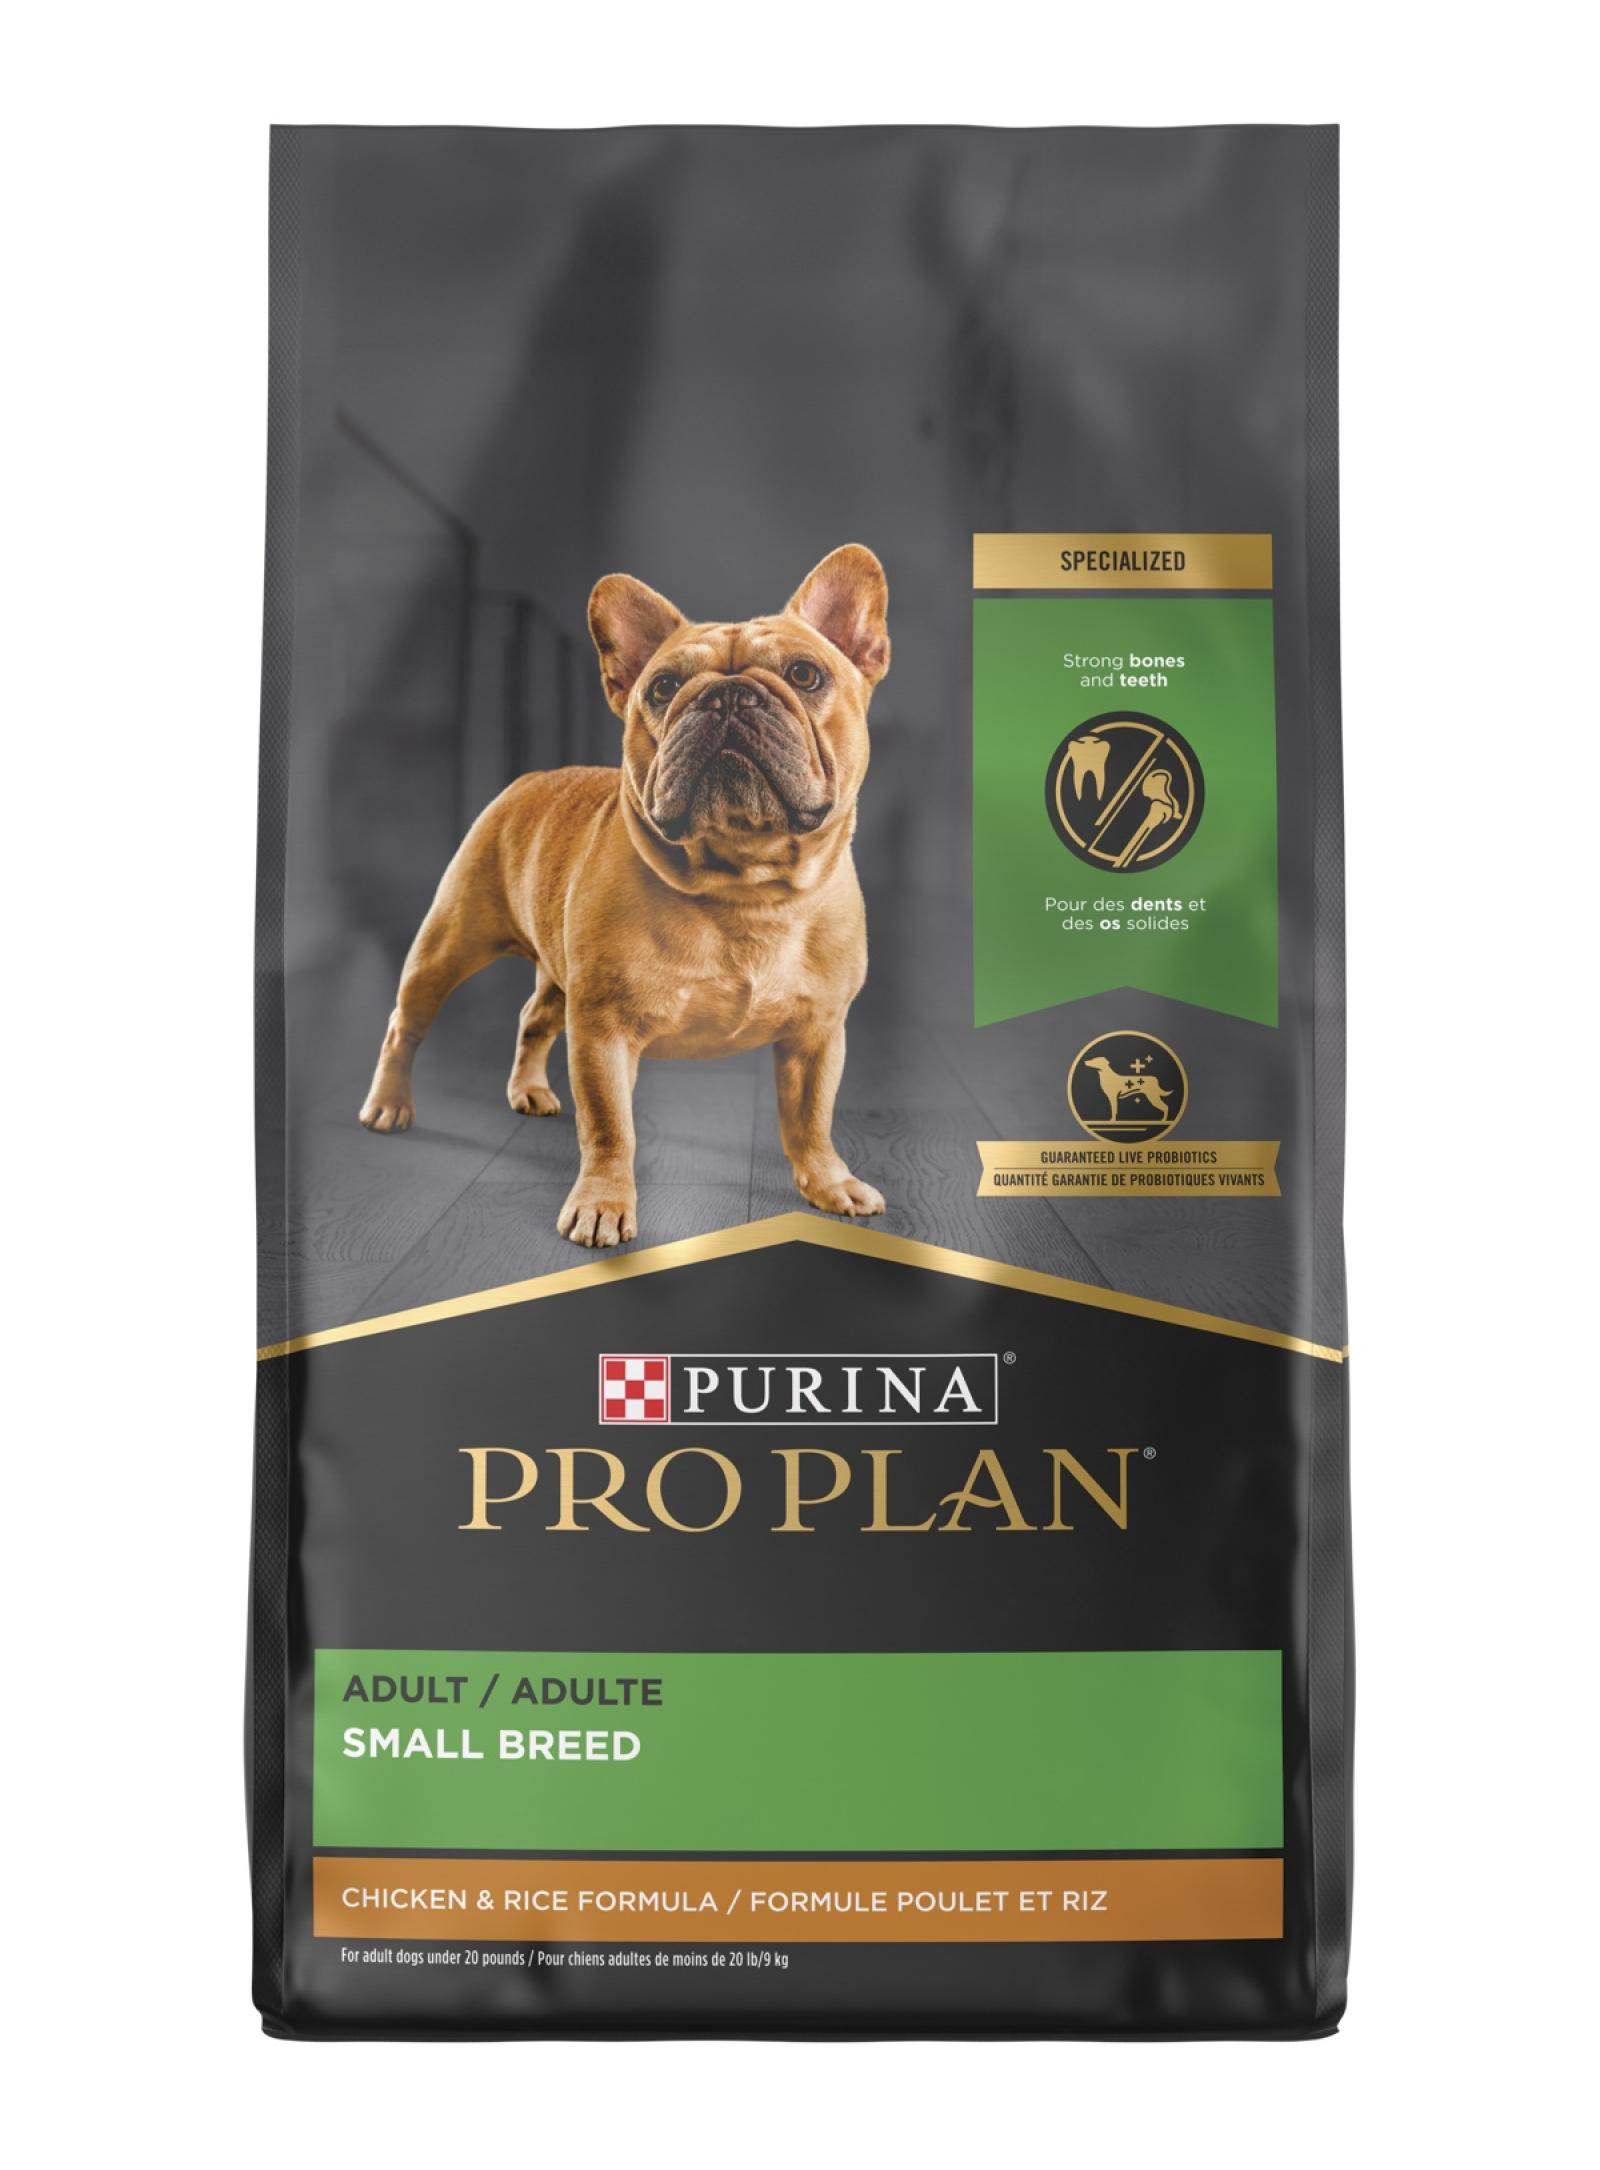 Purina Pro Plan Adult Small Breed Chicken & Rice Formula